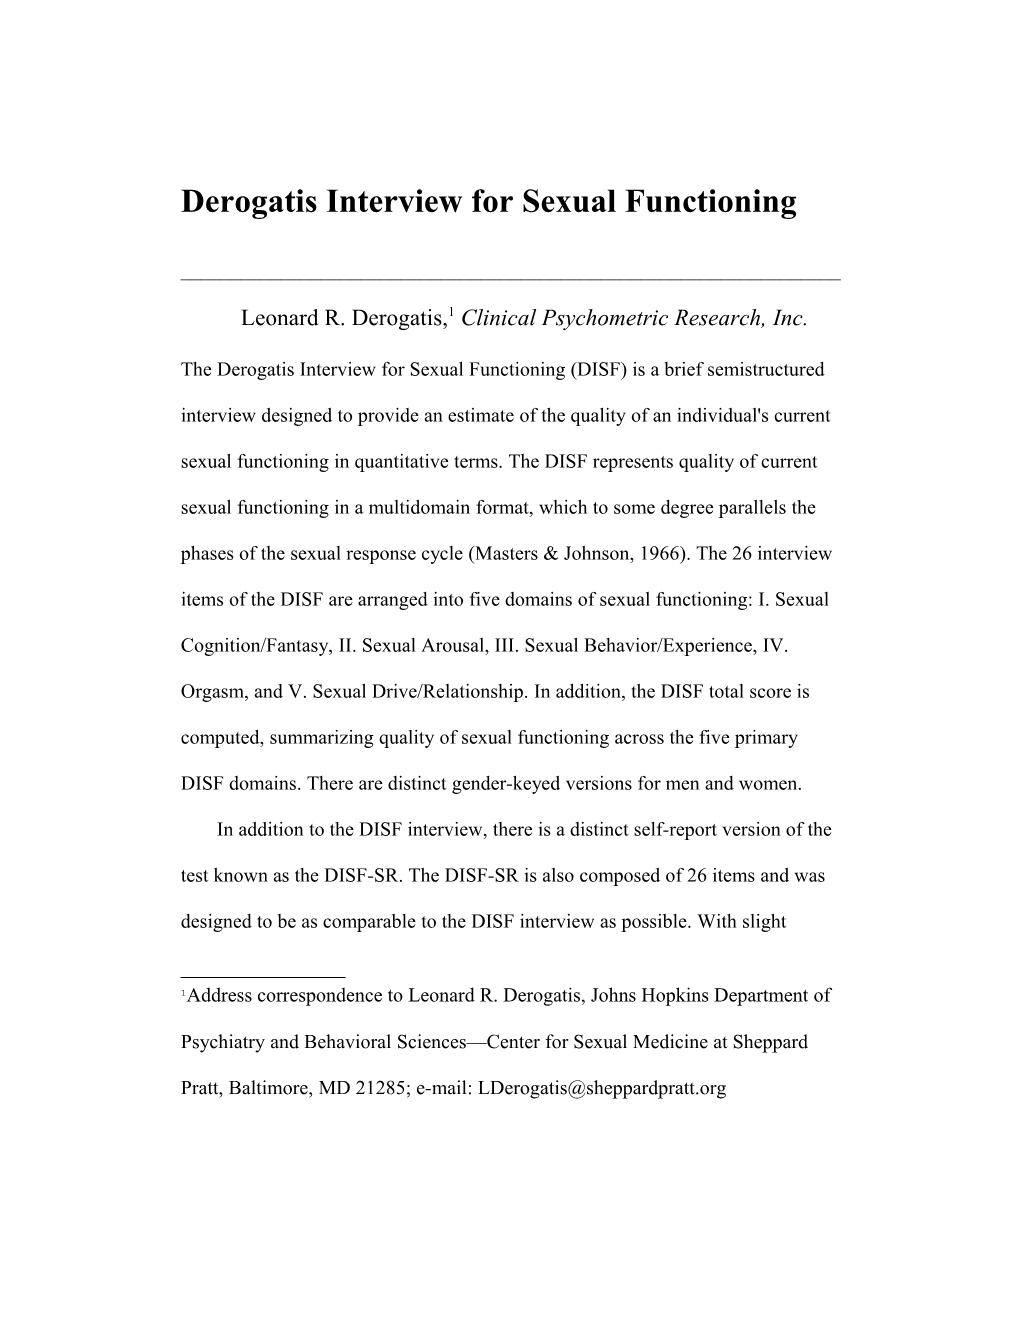 The Derogatis Interview for Sexual Functioning